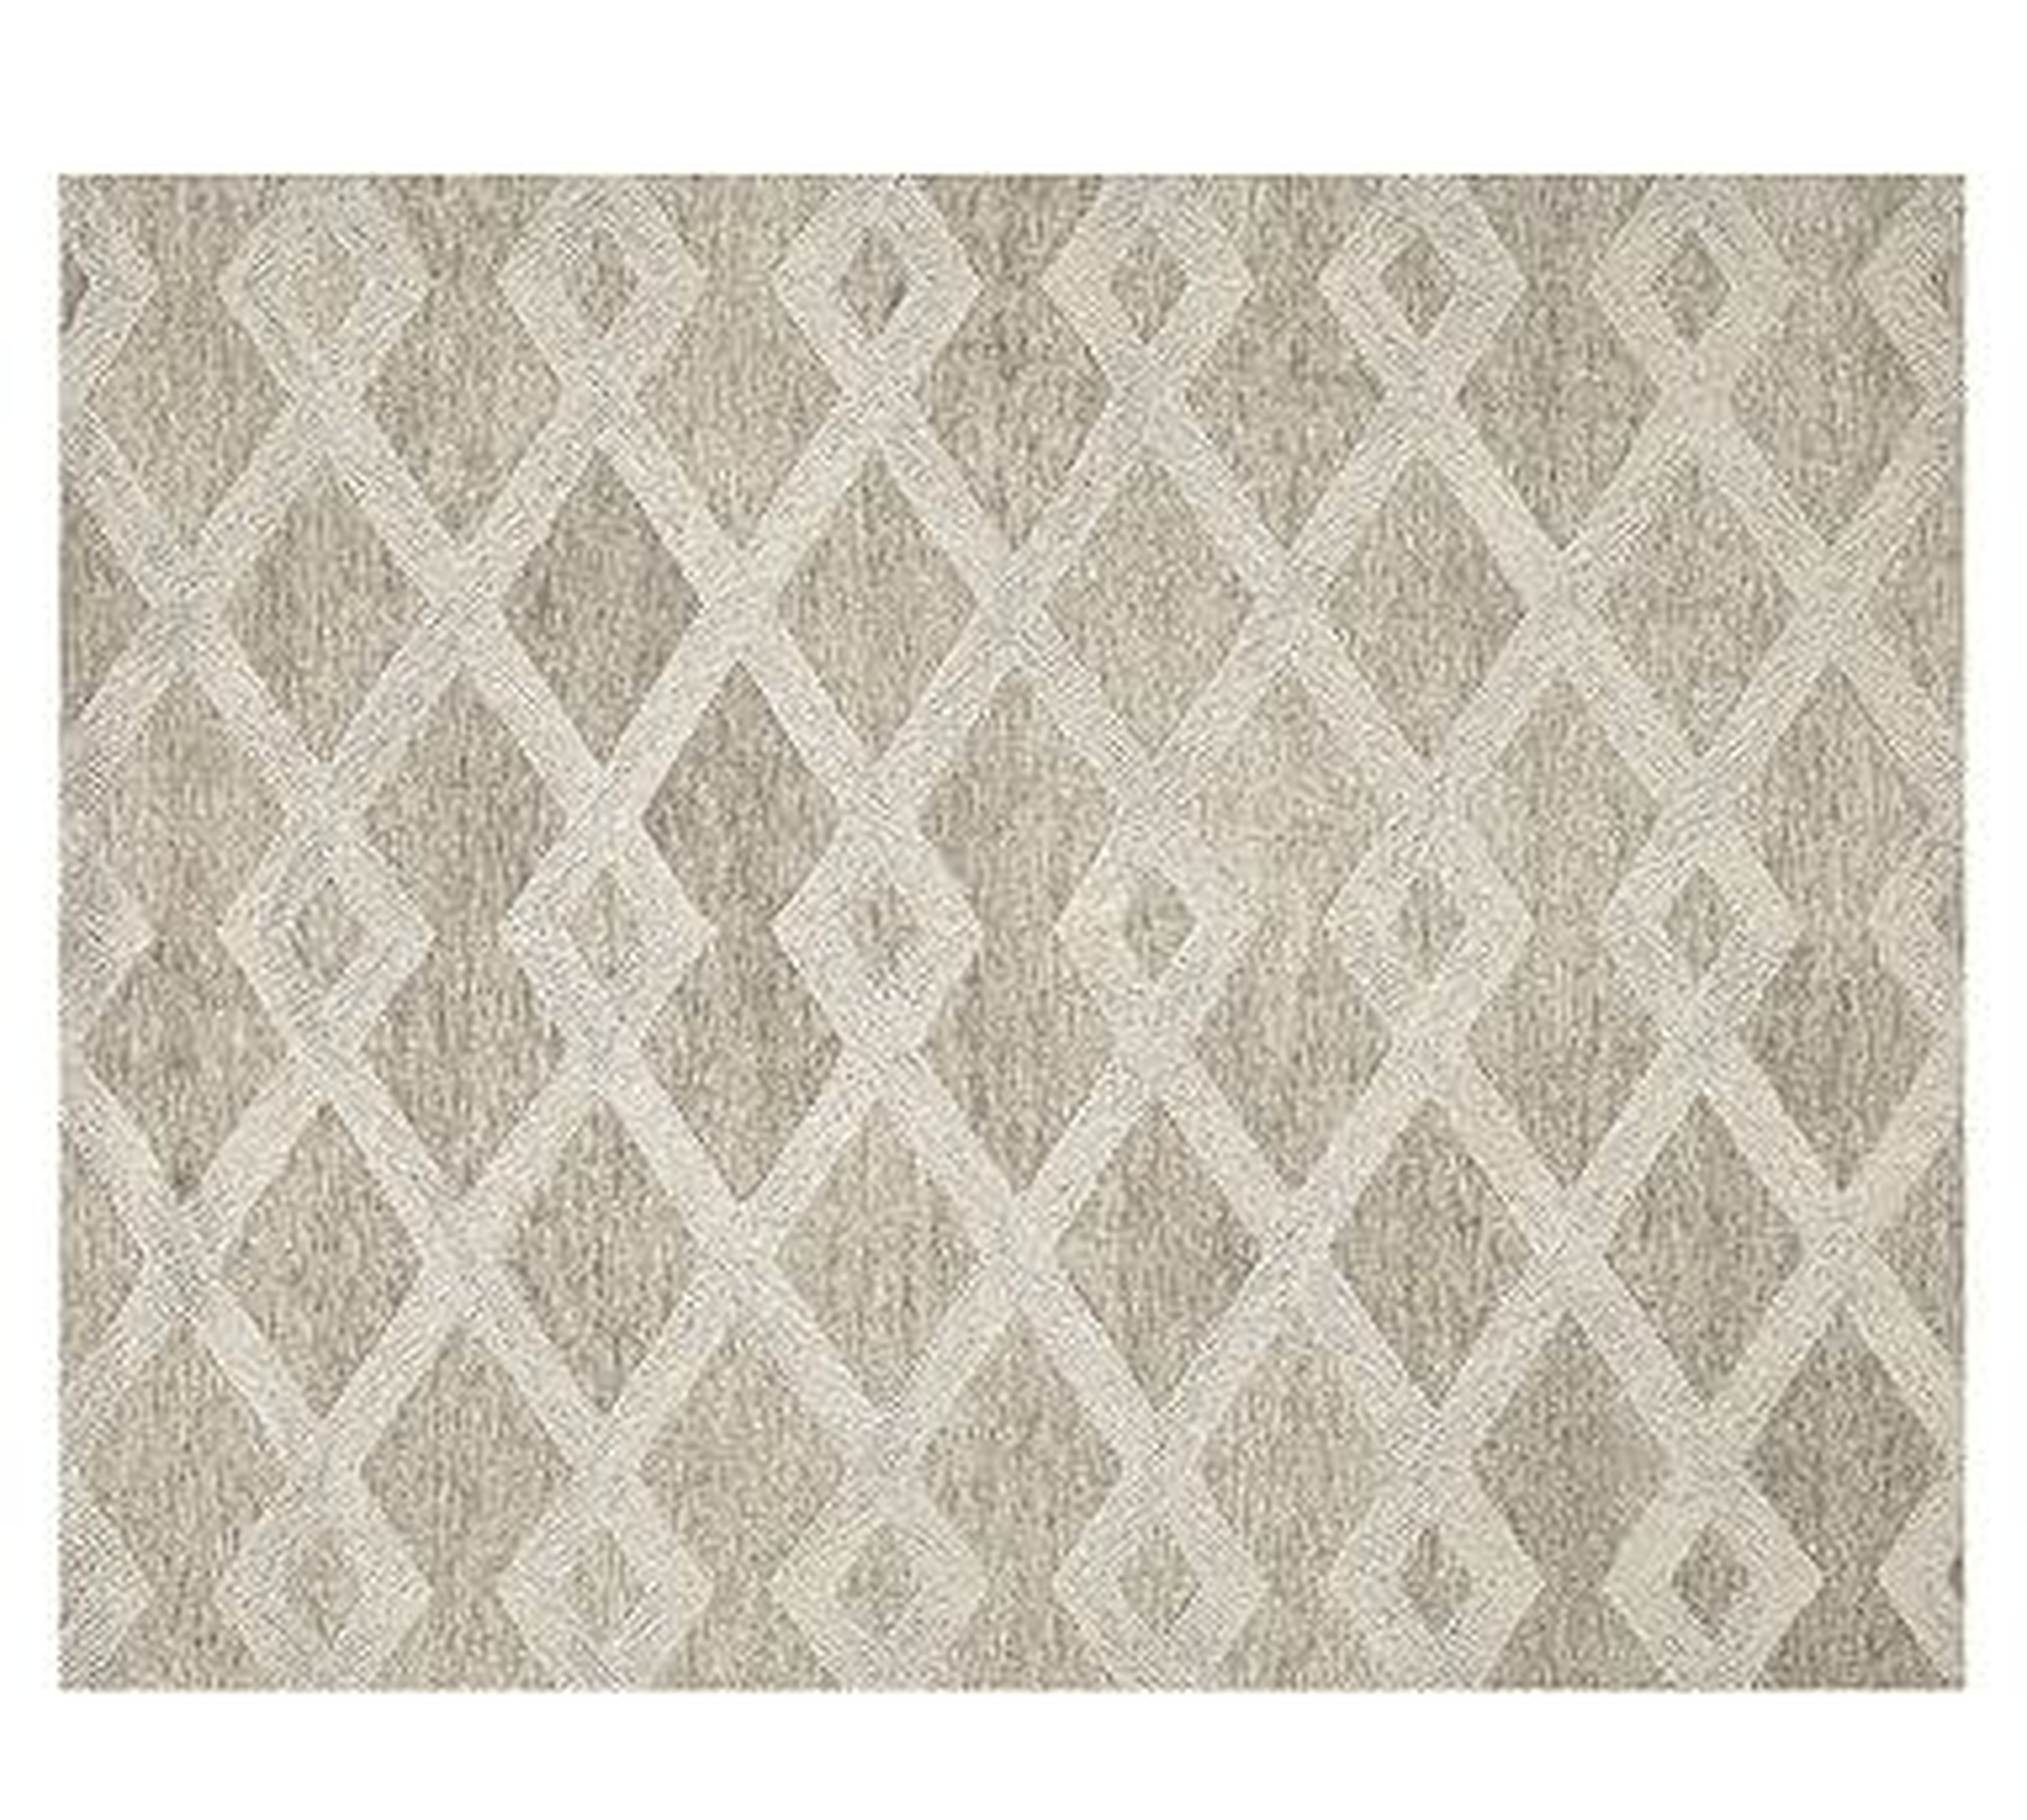 Chase Tufted Rug, 9x12', Natural - Pottery Barn